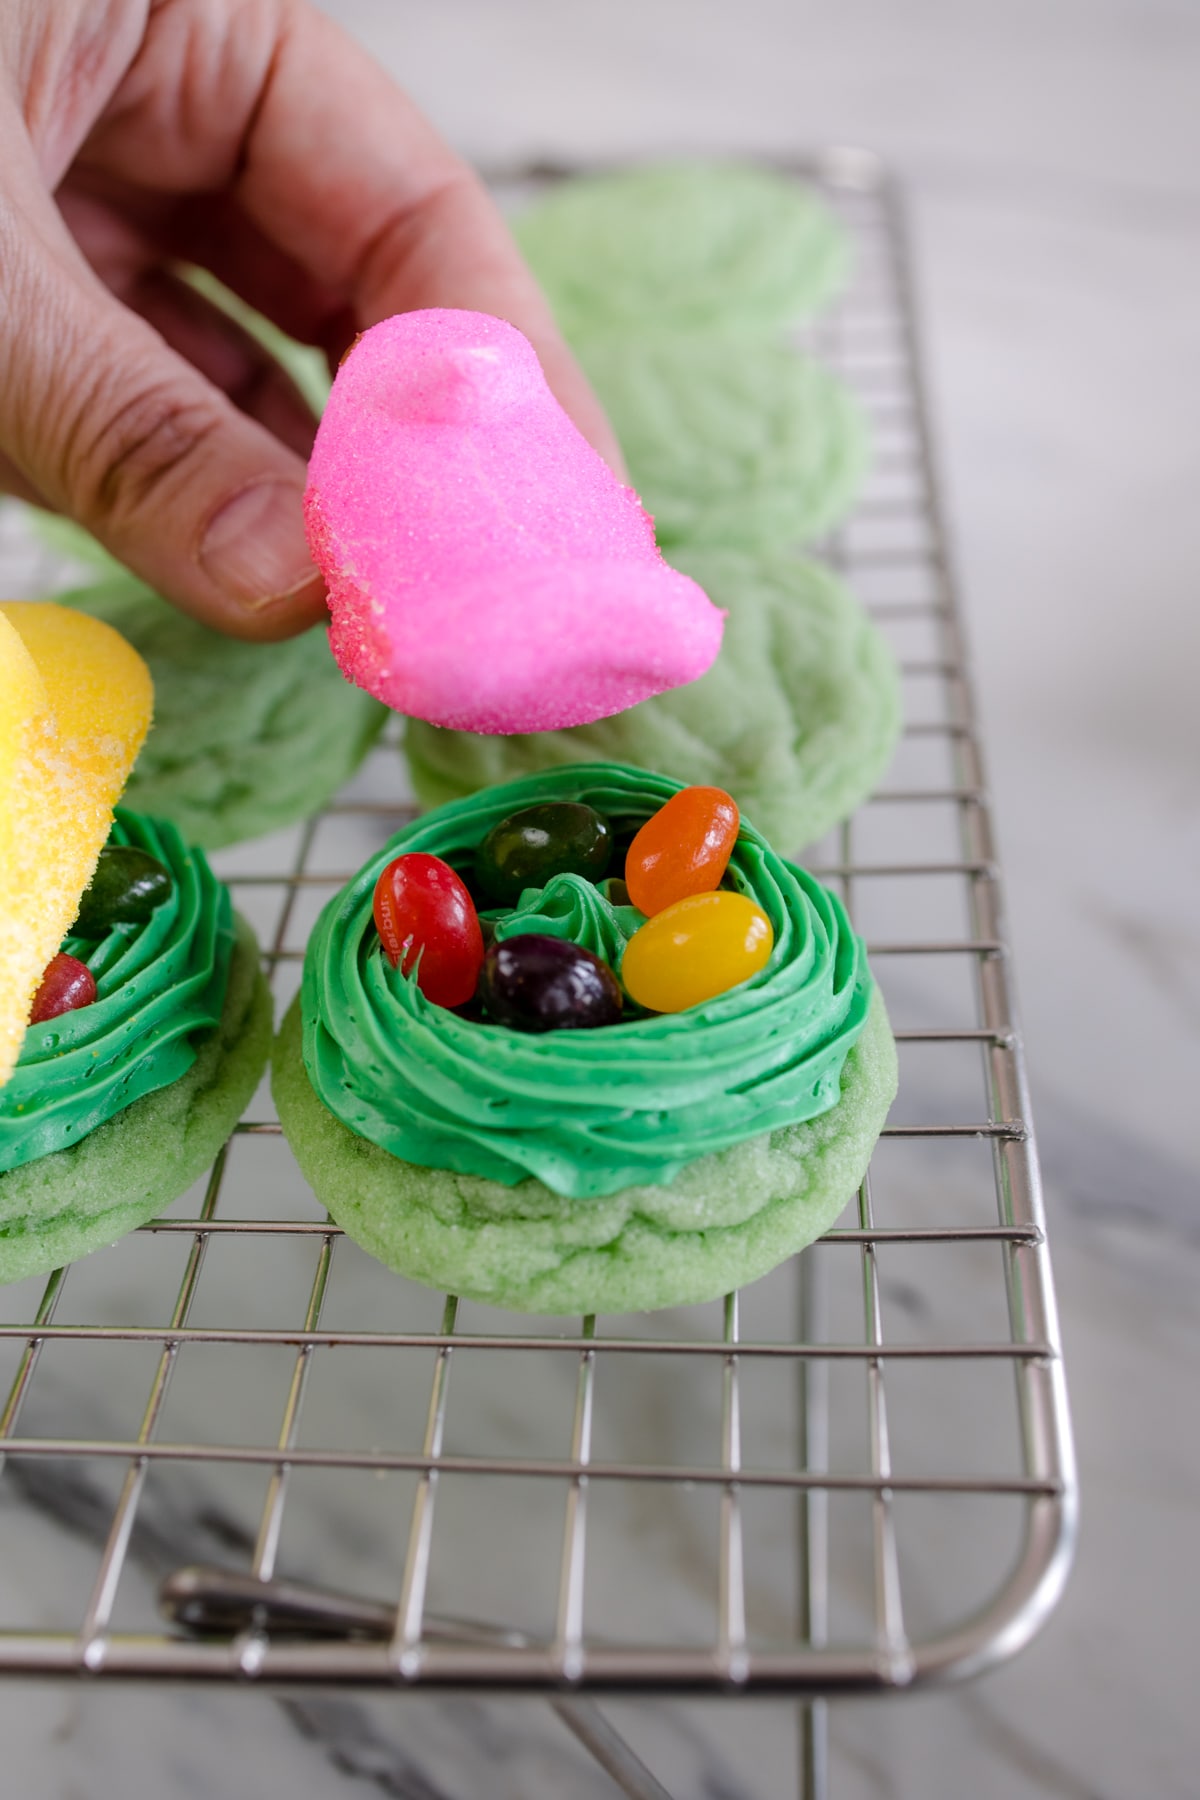 Close up of a pink chick Peep marshmallow being put on top of jelly beans on a green frosting 'nest' on top of a green cookie on a wire rack.